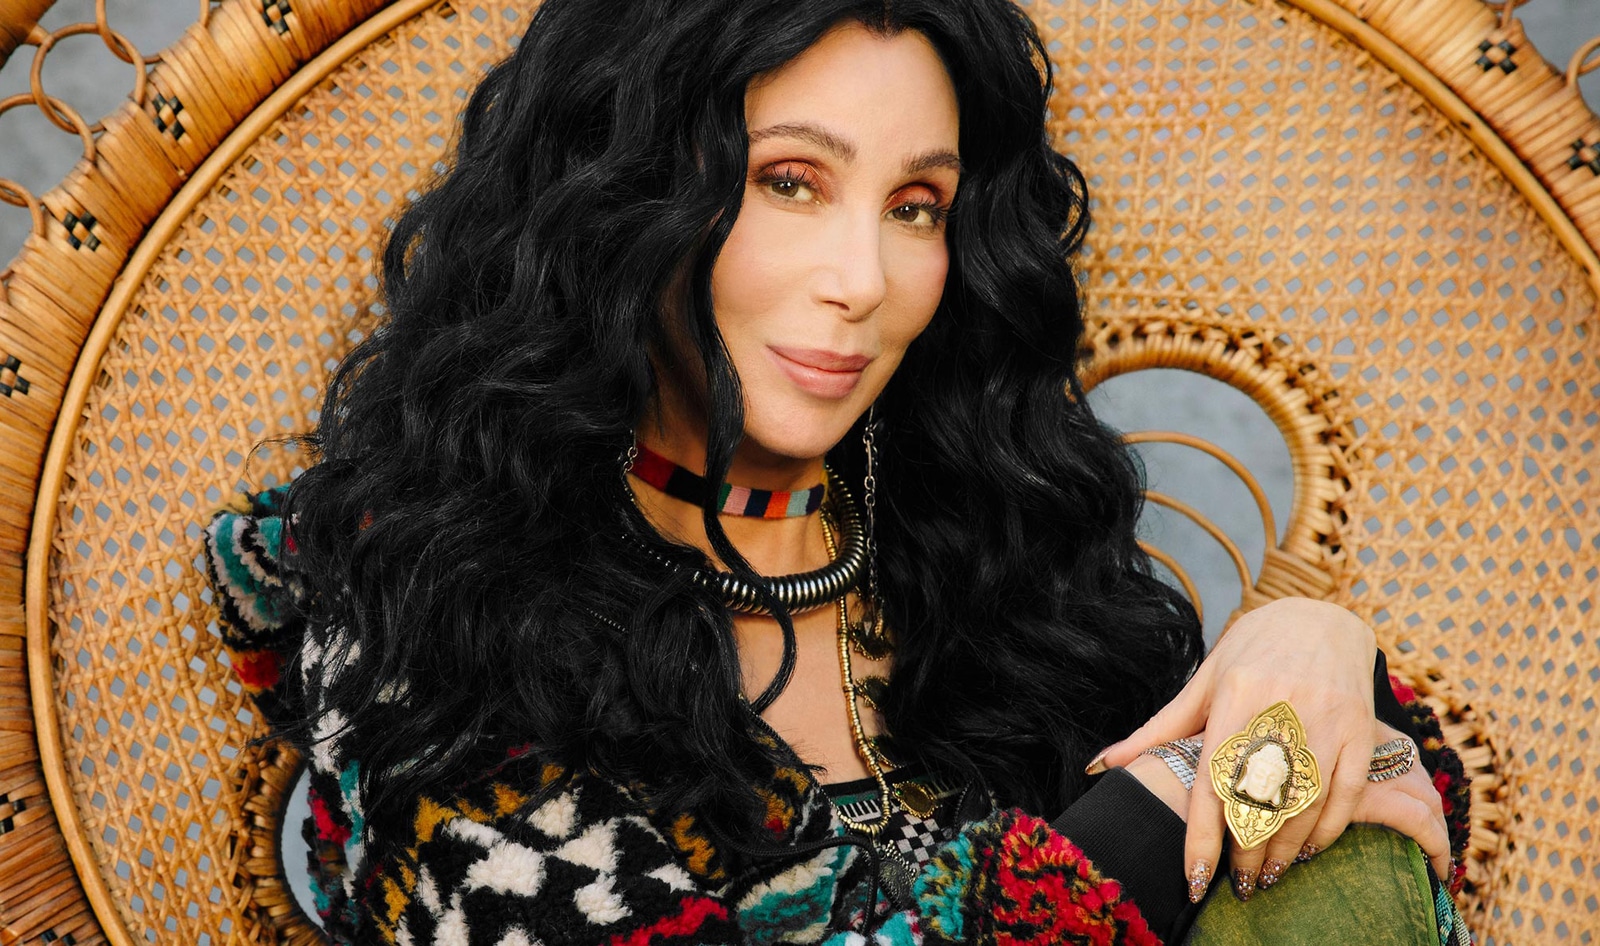 77-Year-Old Cher Has Eaten Like a Blue Zoner for 30 Years. Is That Her Secret?